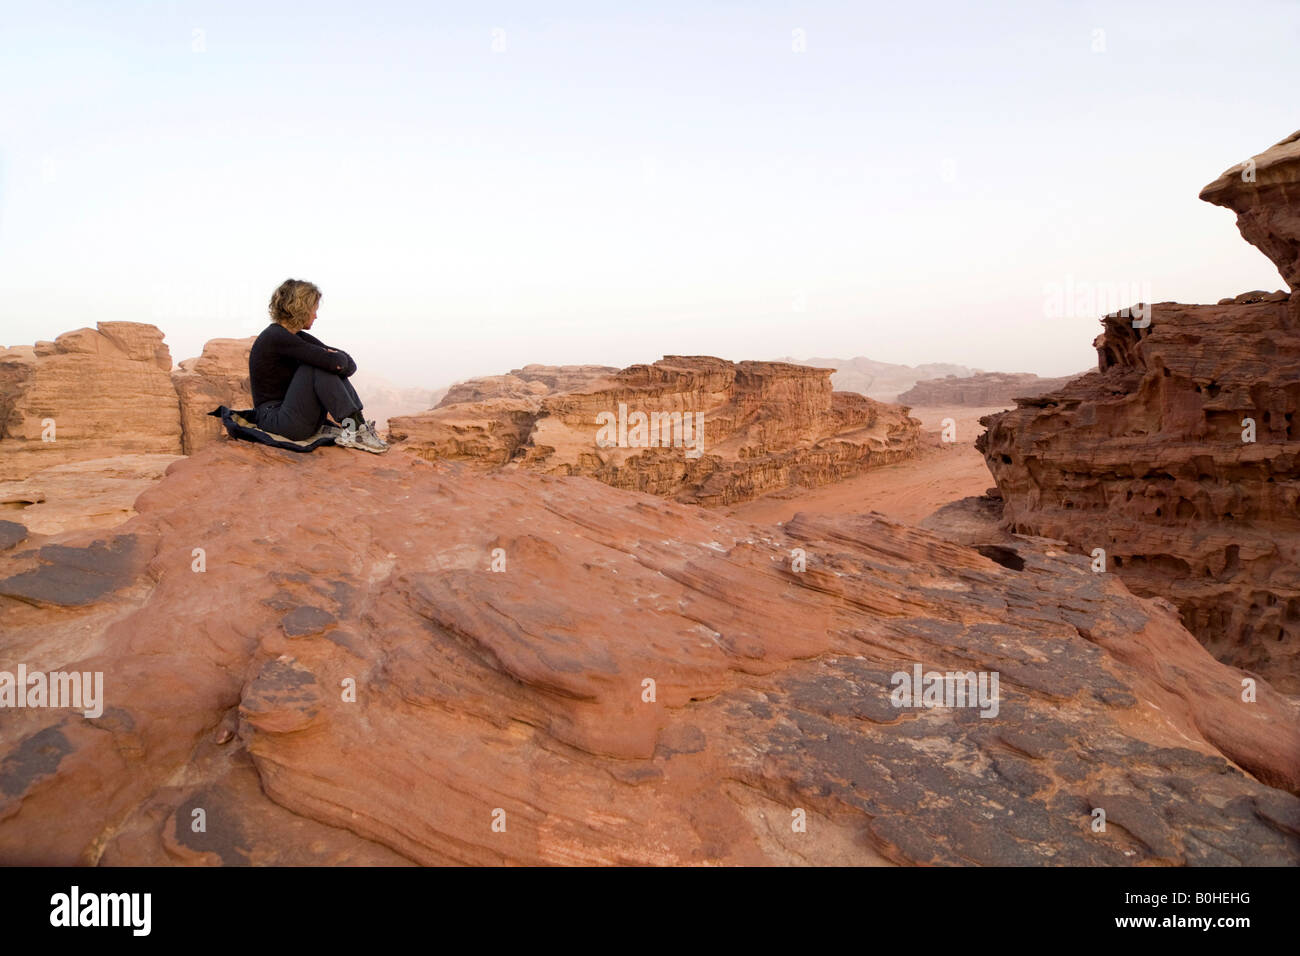 Woman sitting on a rock ledge looking off into the distance, Wadi Rum, Jordan, Middle East Stock Photo